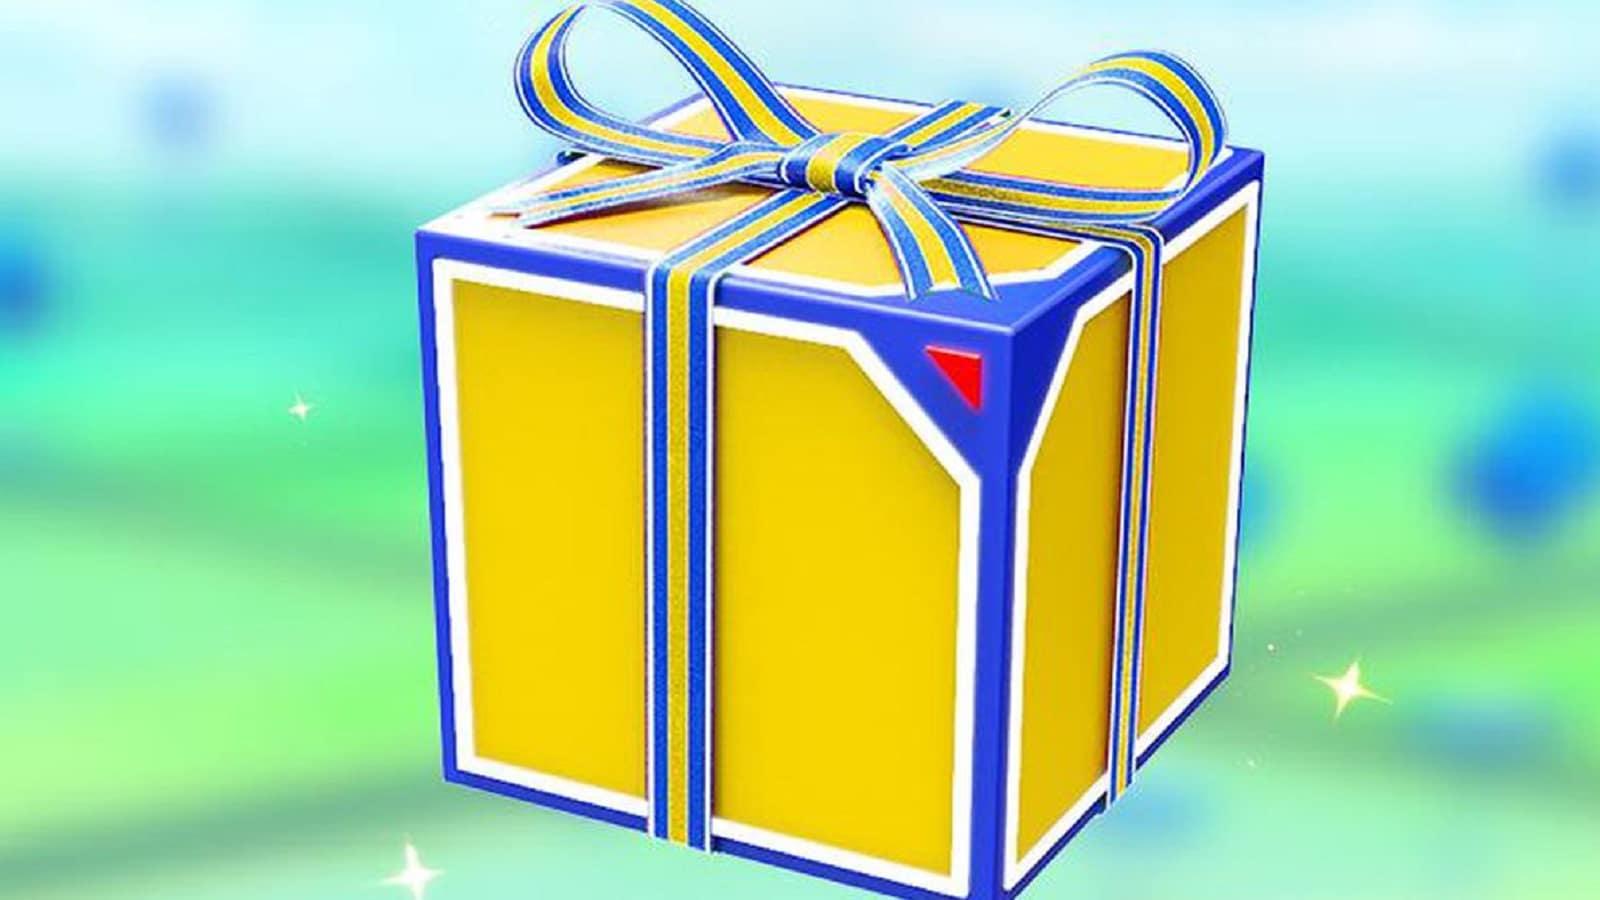 Pokemon Go Players Call Out Niantic Over Bad Premium Bundle Boxes